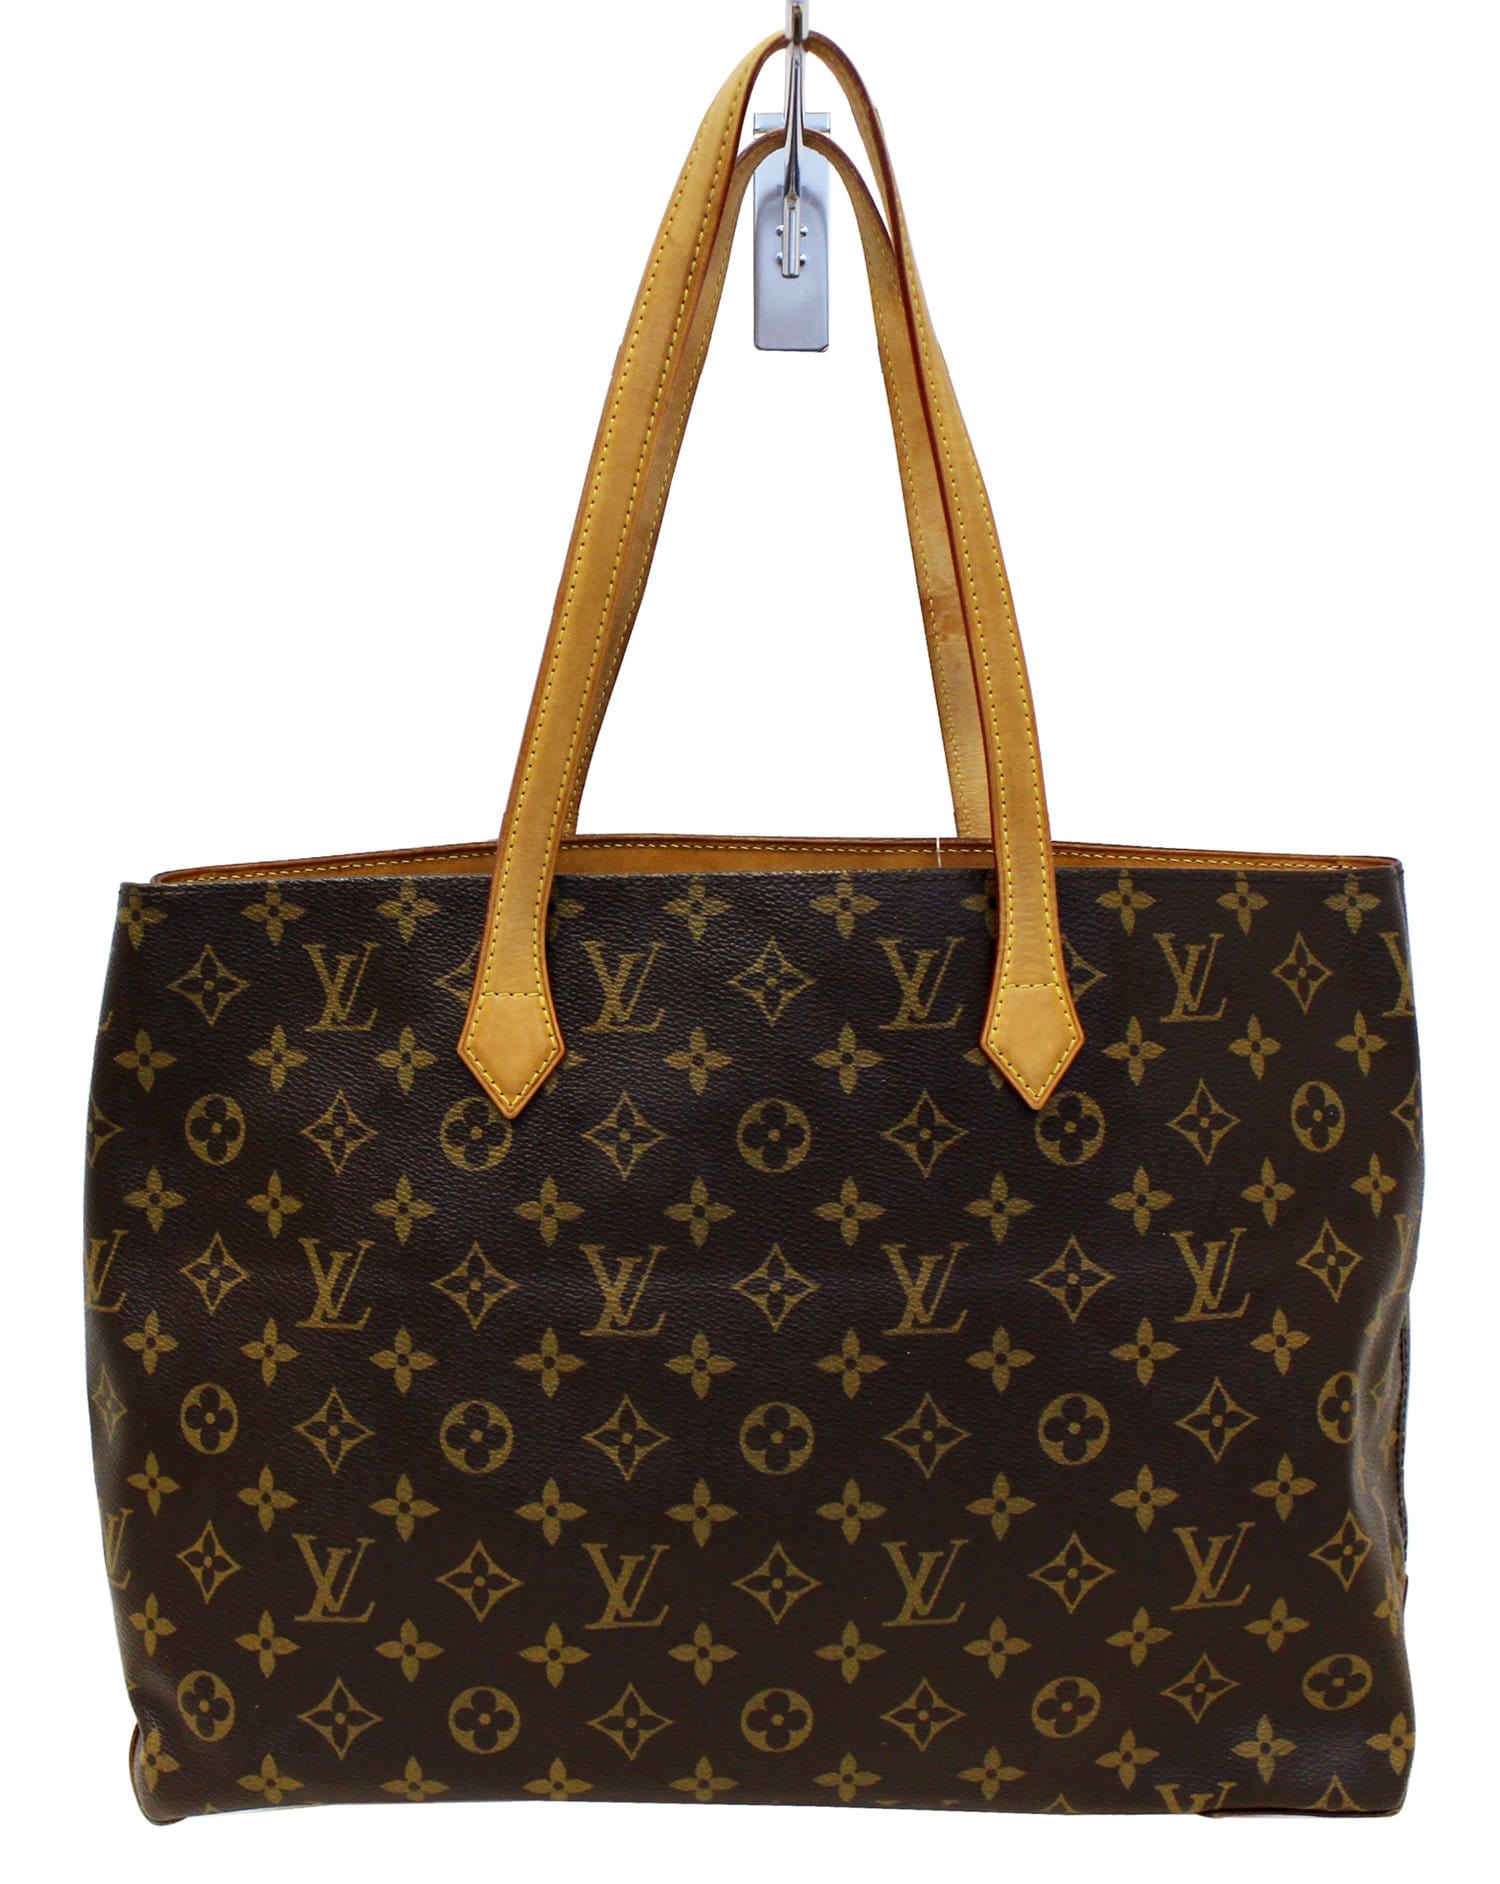 Gorgeous Louis Vuitton Eva - this bag has been discontinued by